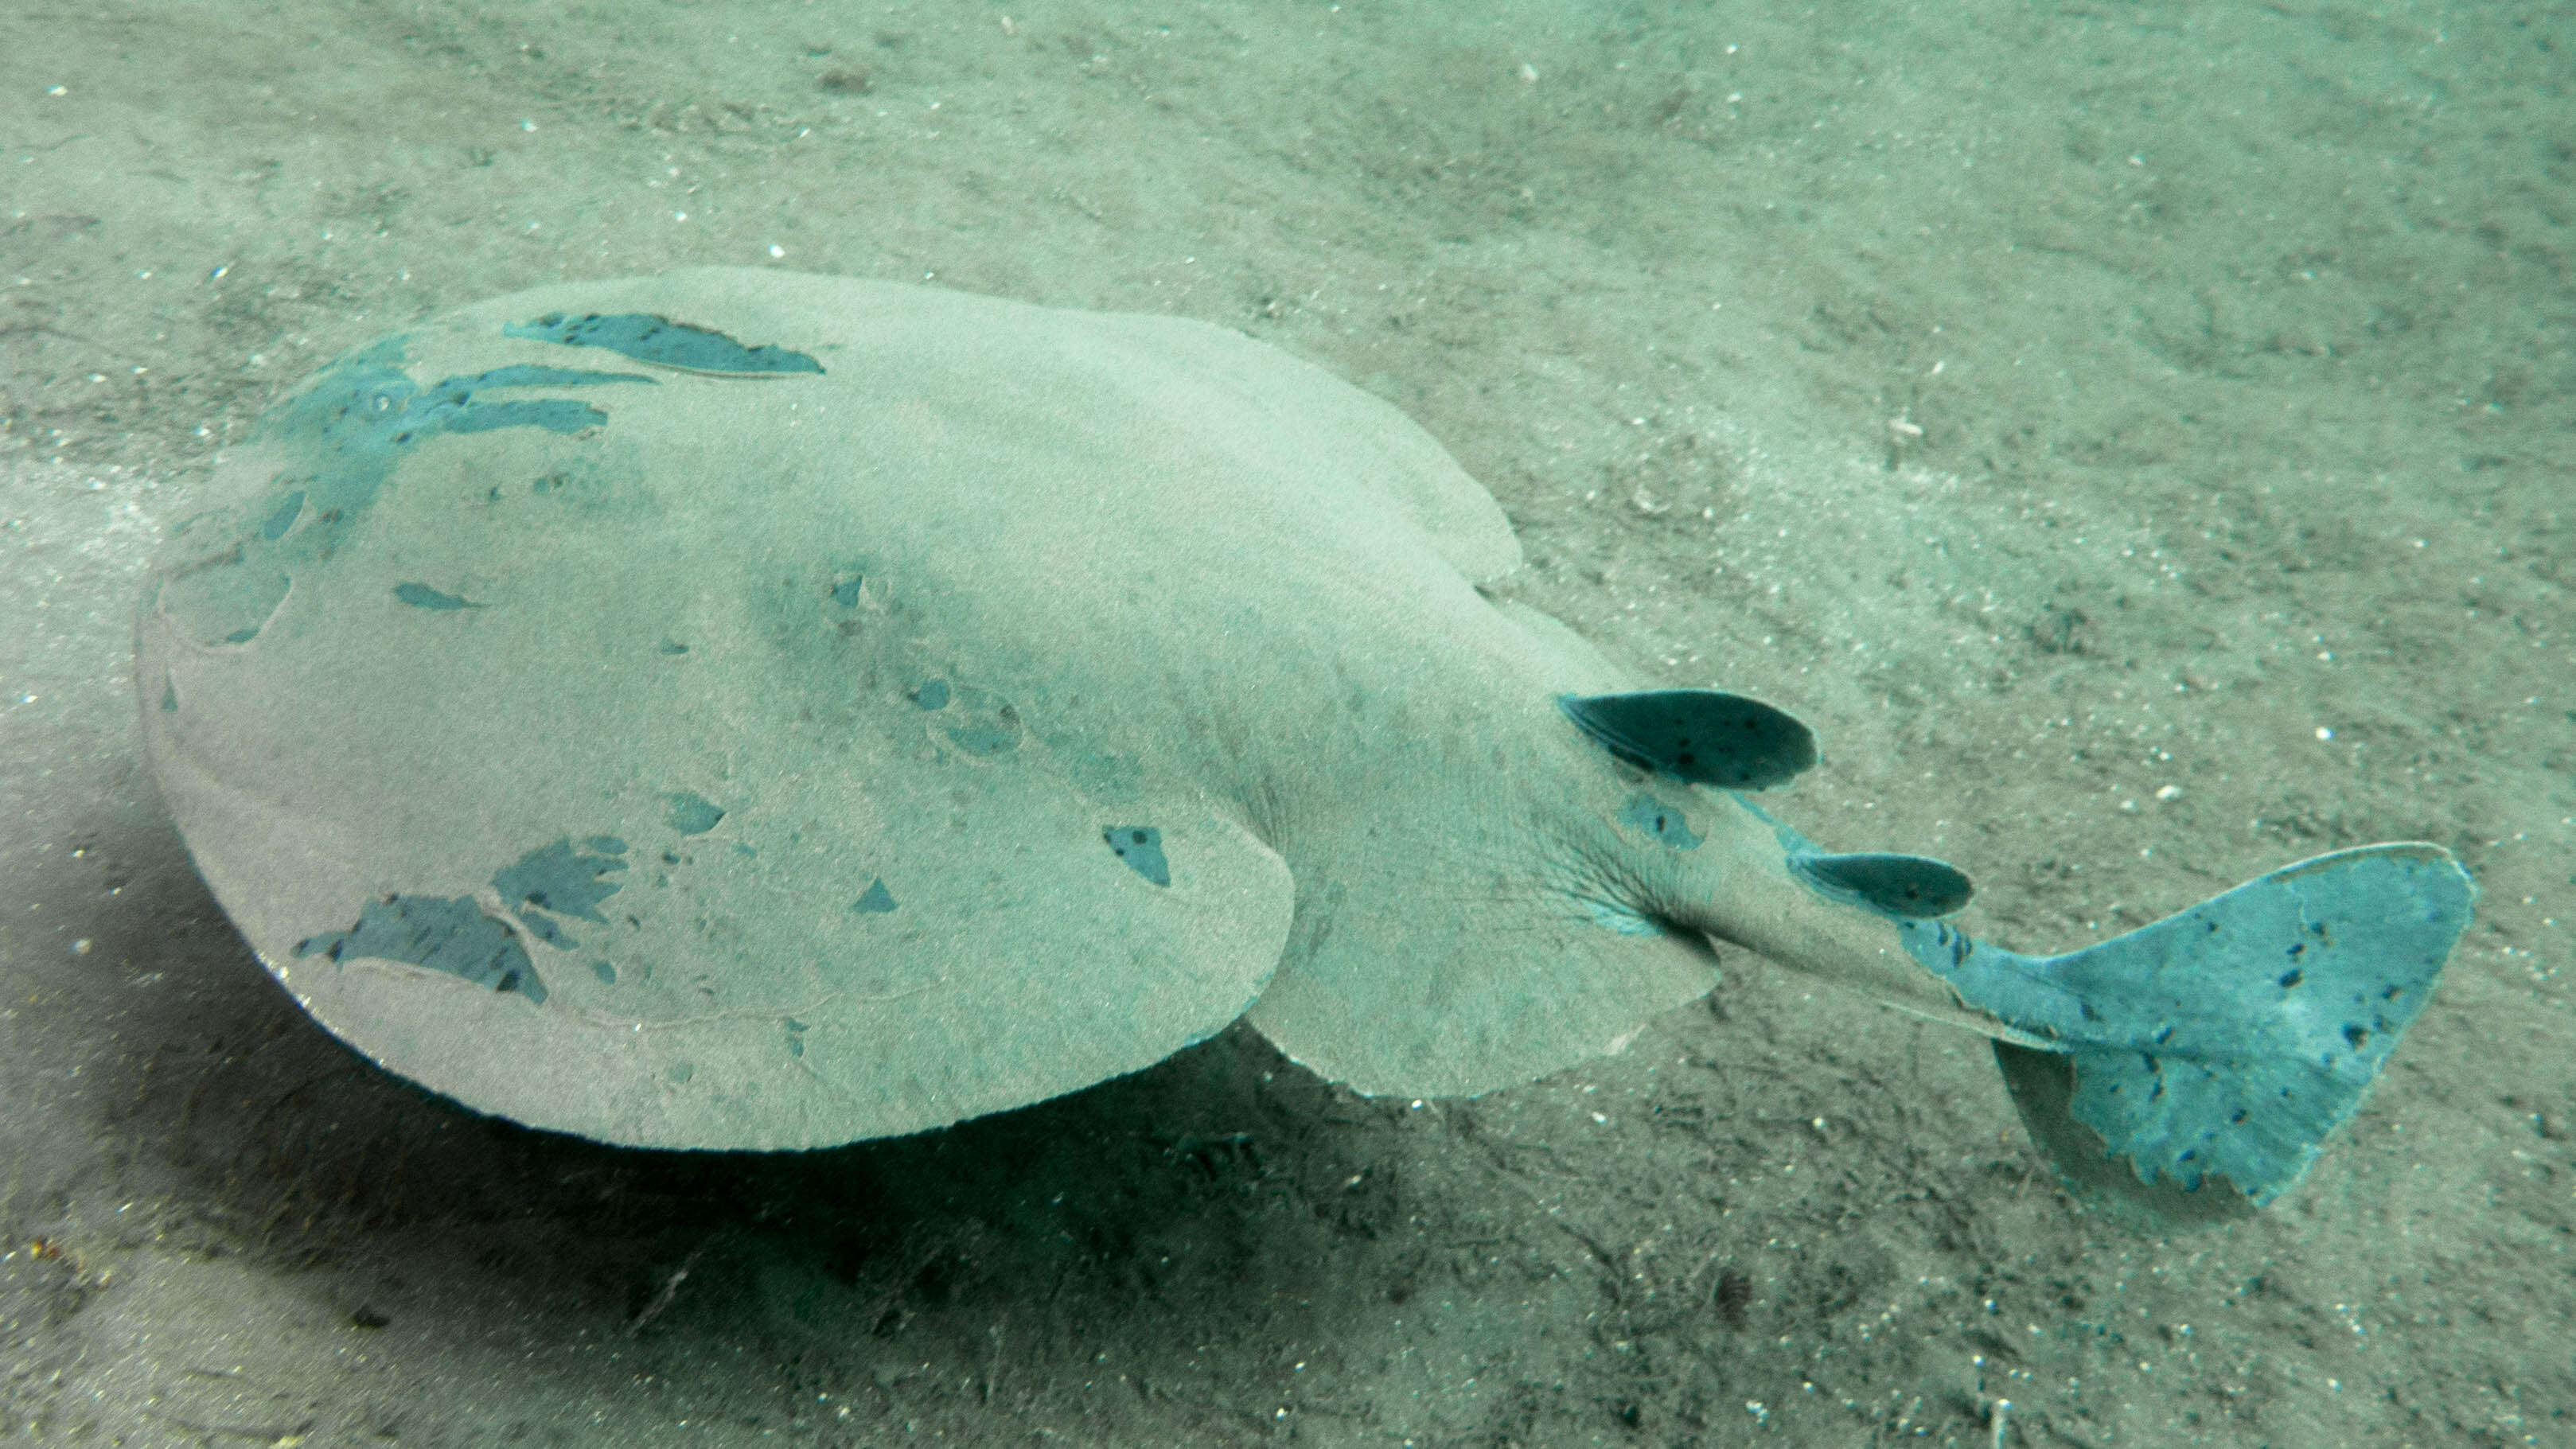 Image of Pacific electric ray